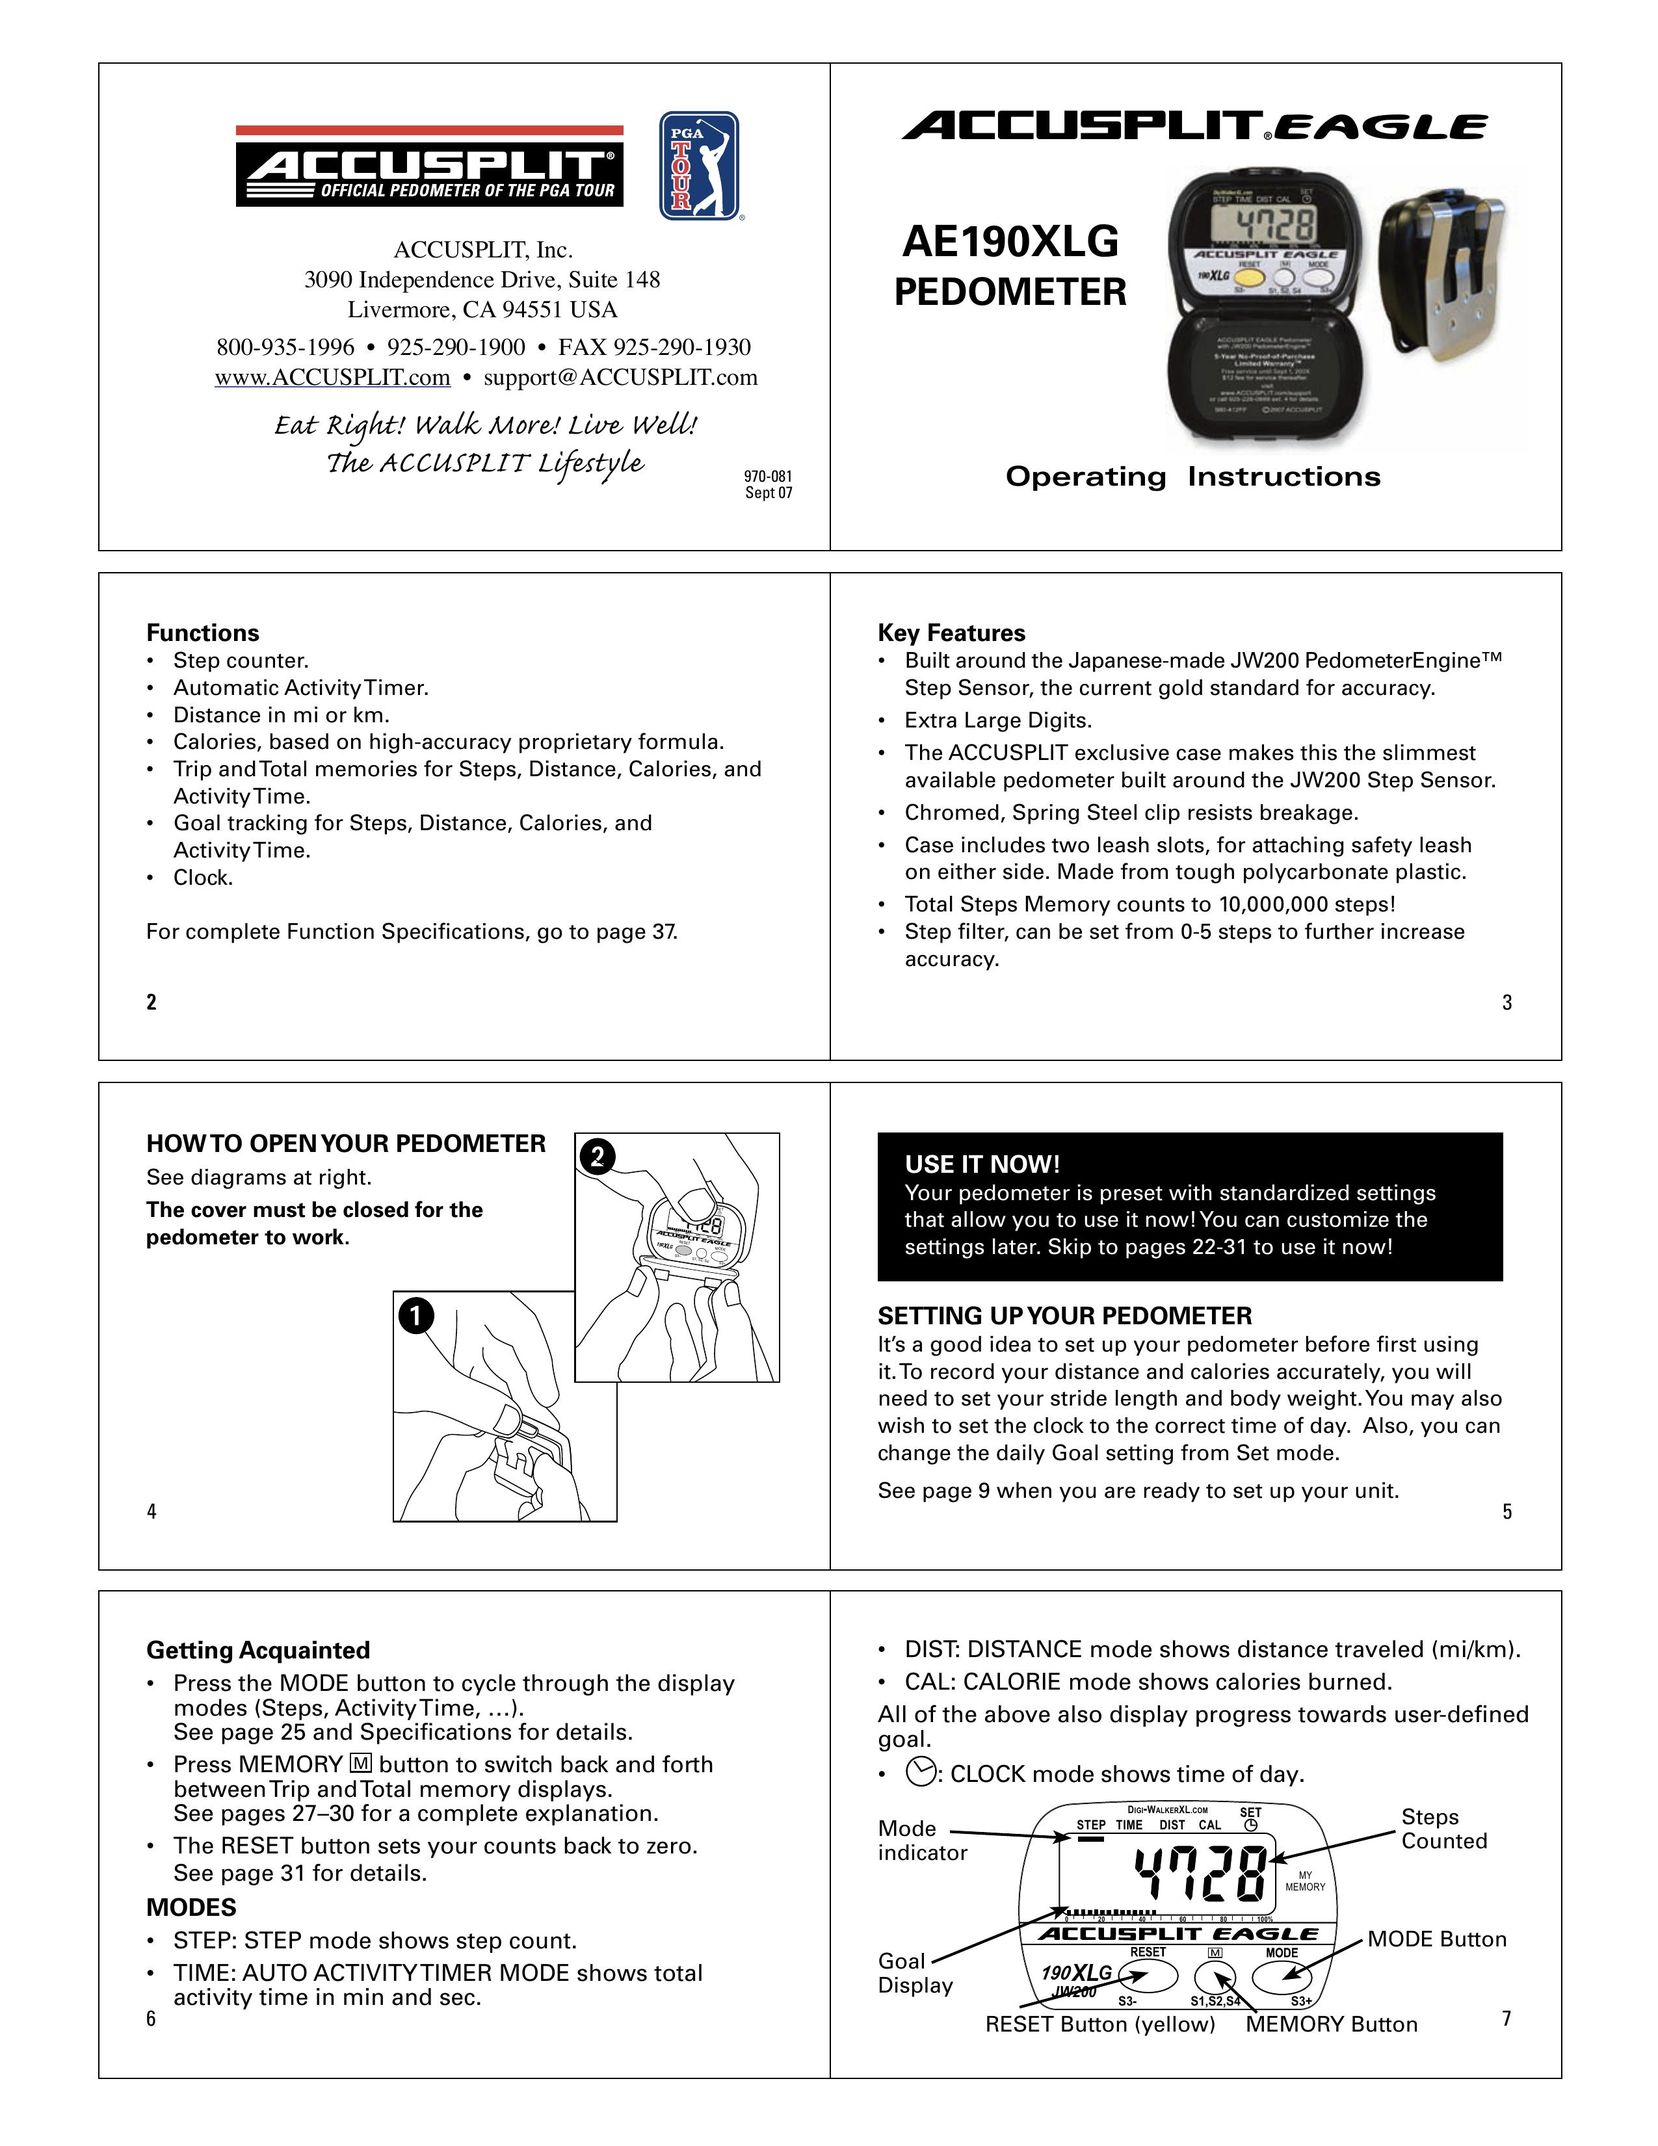 Accusplit 190XLG Fitness Electronics User Manual